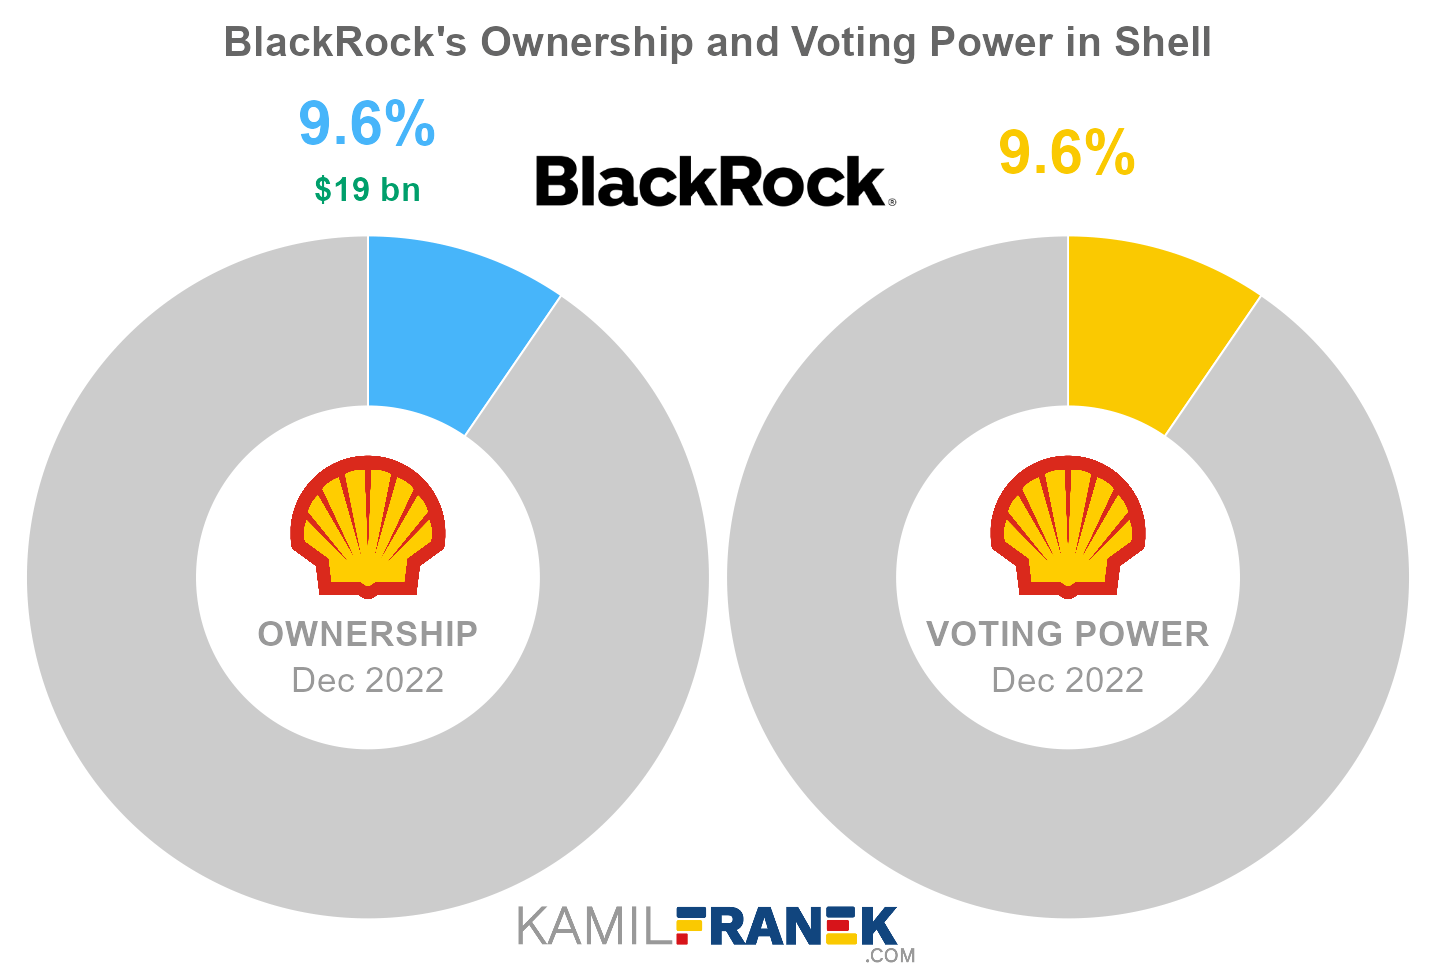 BlackRock's share ownership and voting power in Shell (chart)